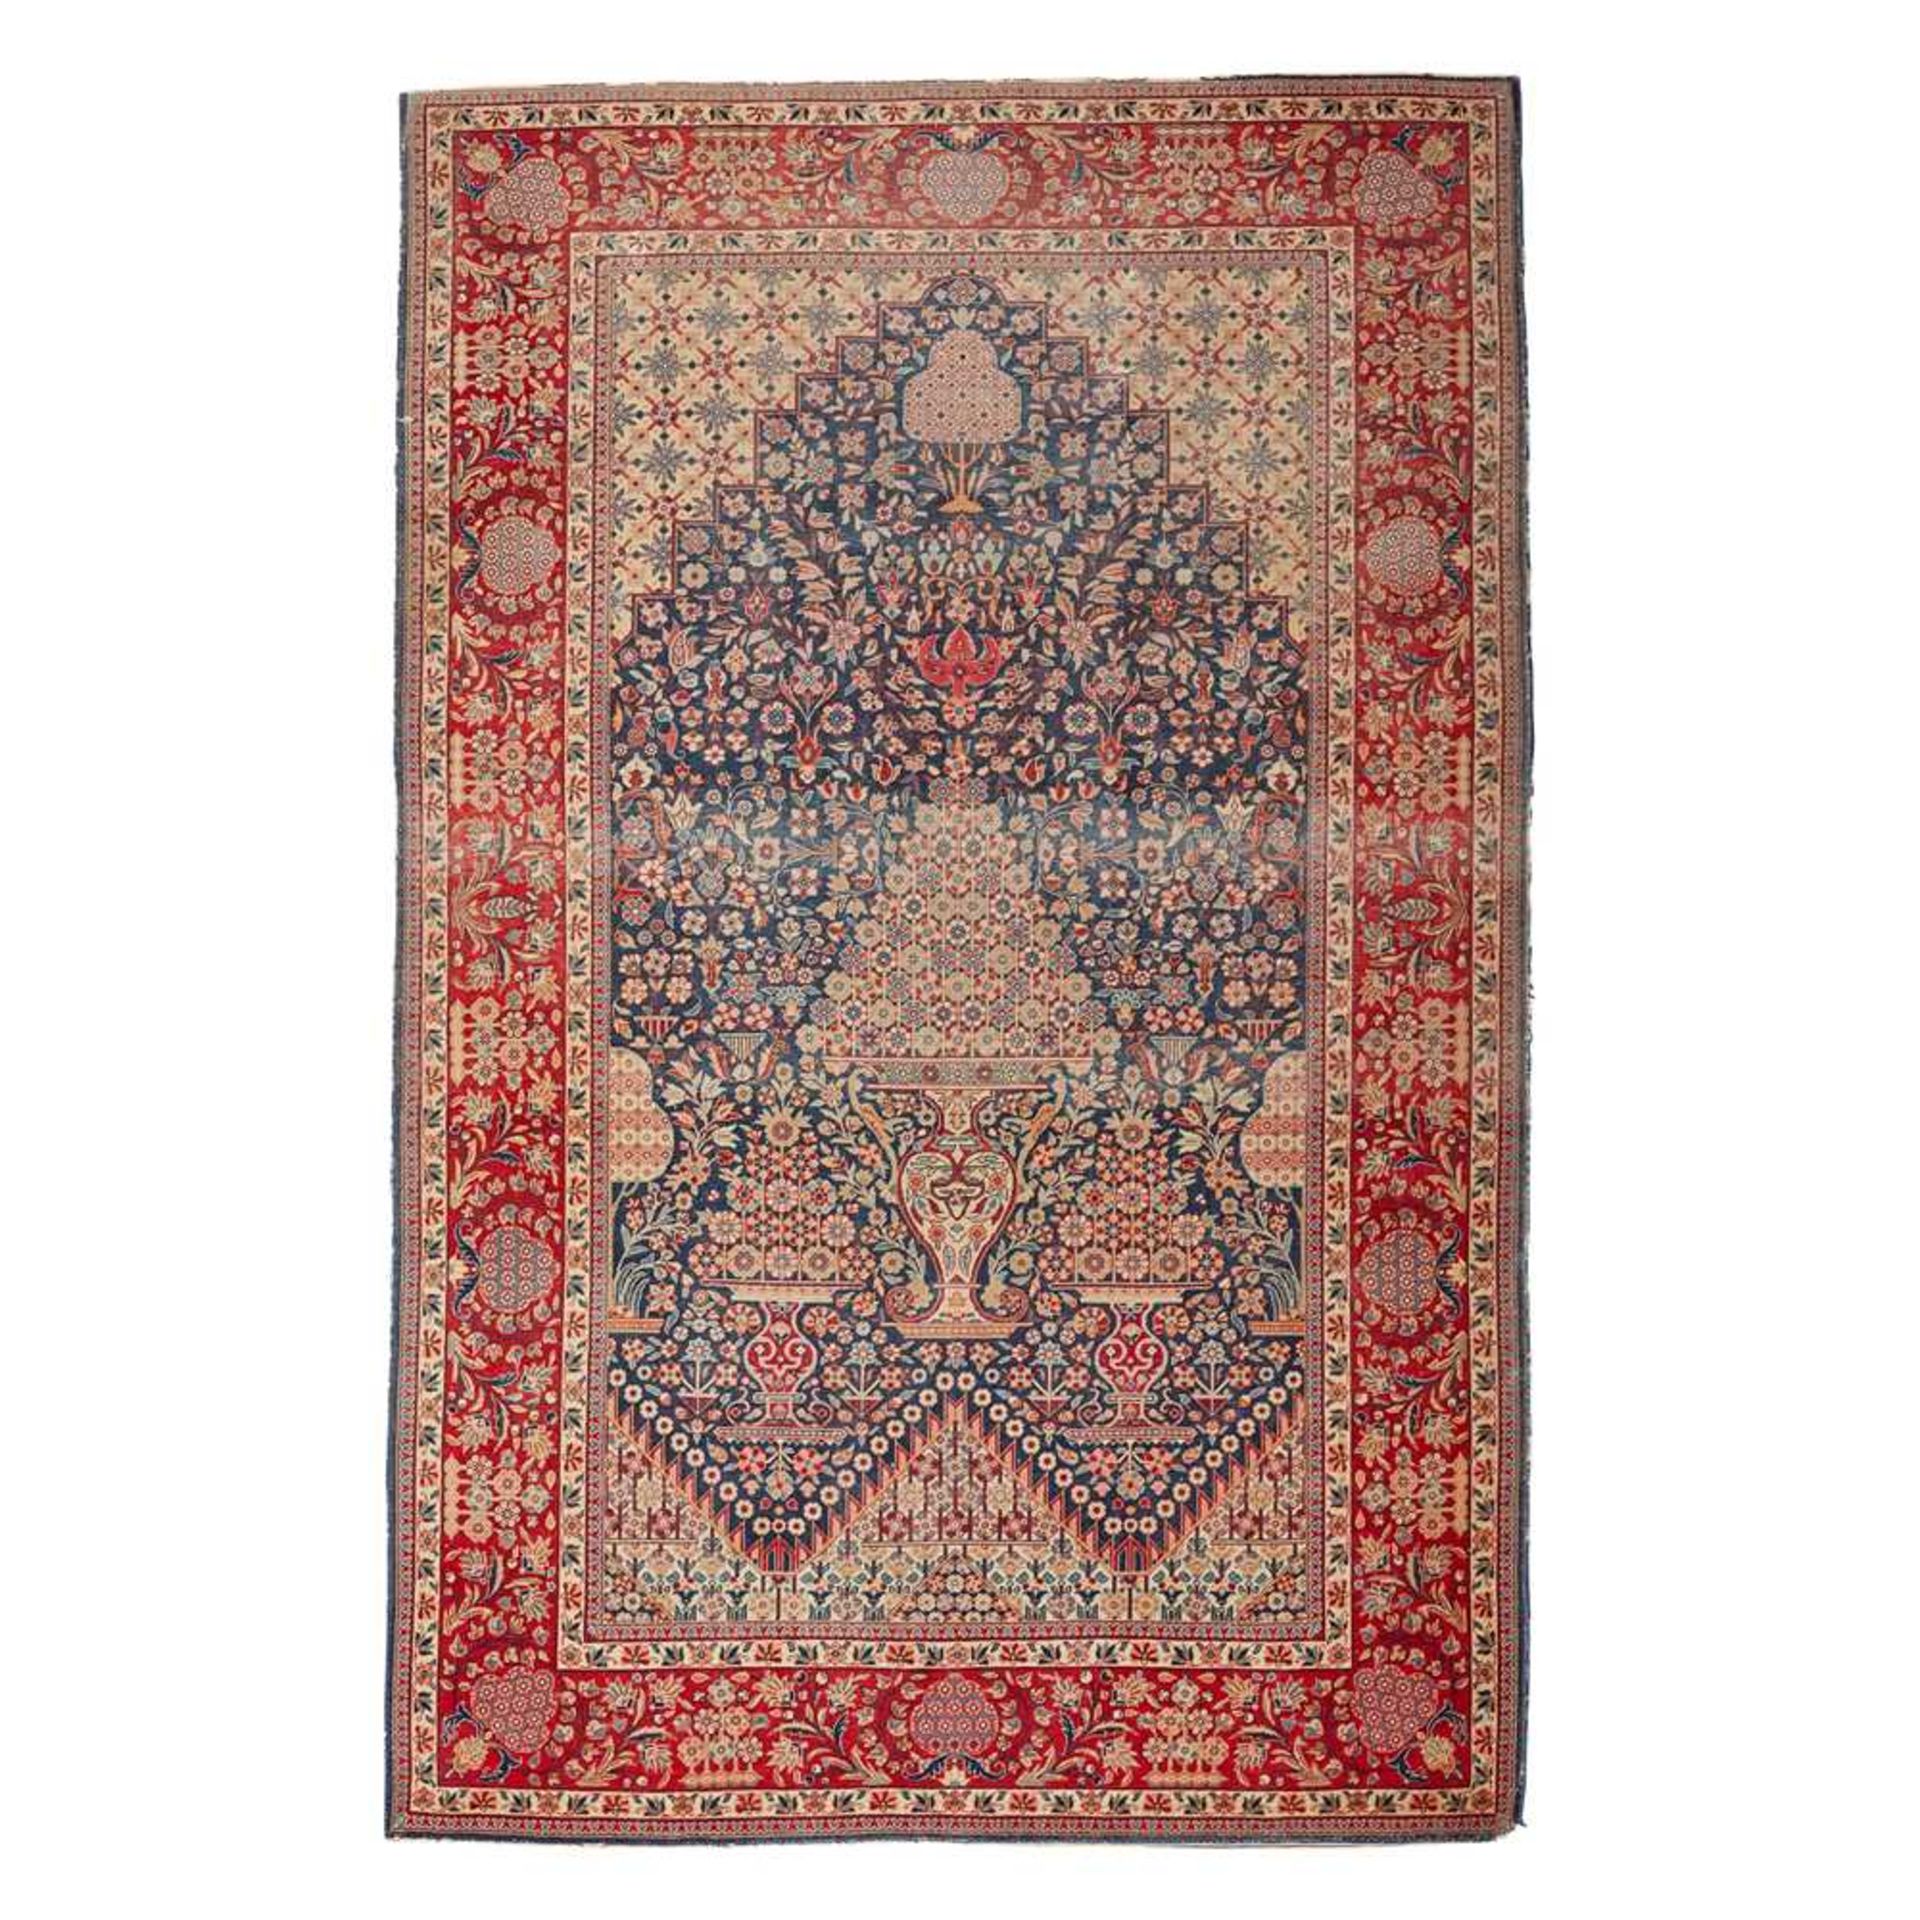 KASHAN PRAYER RUG CENTRAL PERSIA, LATE 19TH/EARLY 20TH CENTURY - Image 2 of 2